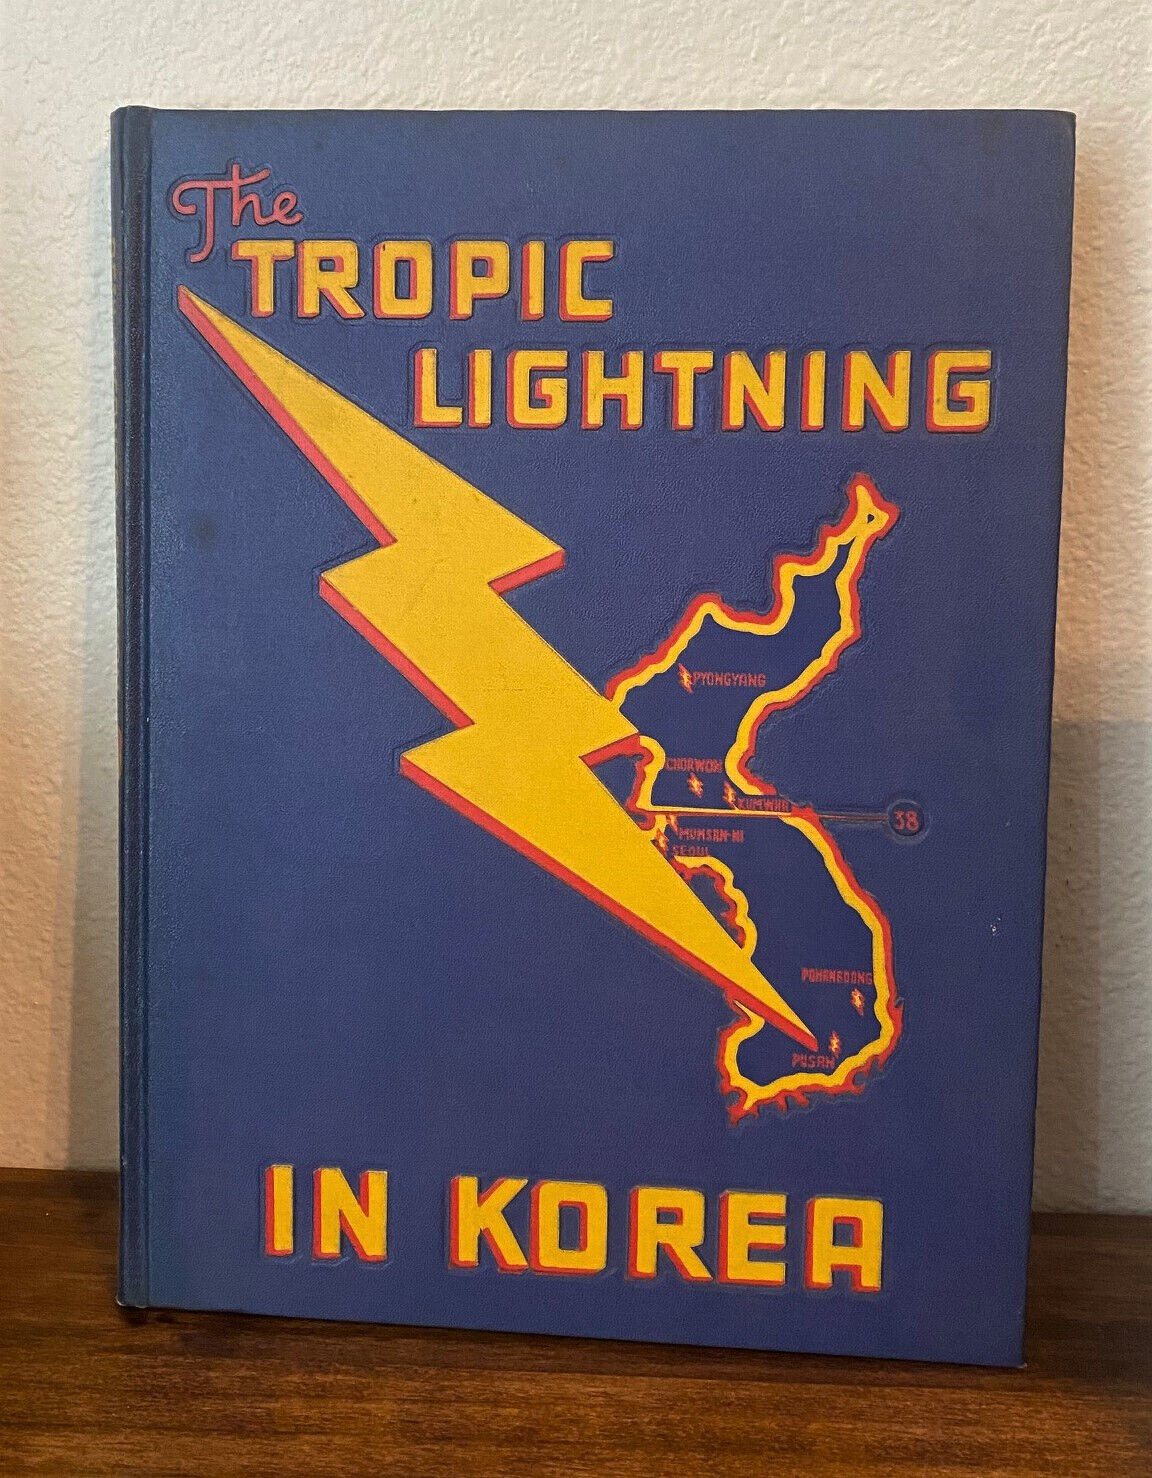 The Tropic Lightning in Korea - US Army 25th Infantry Division Book